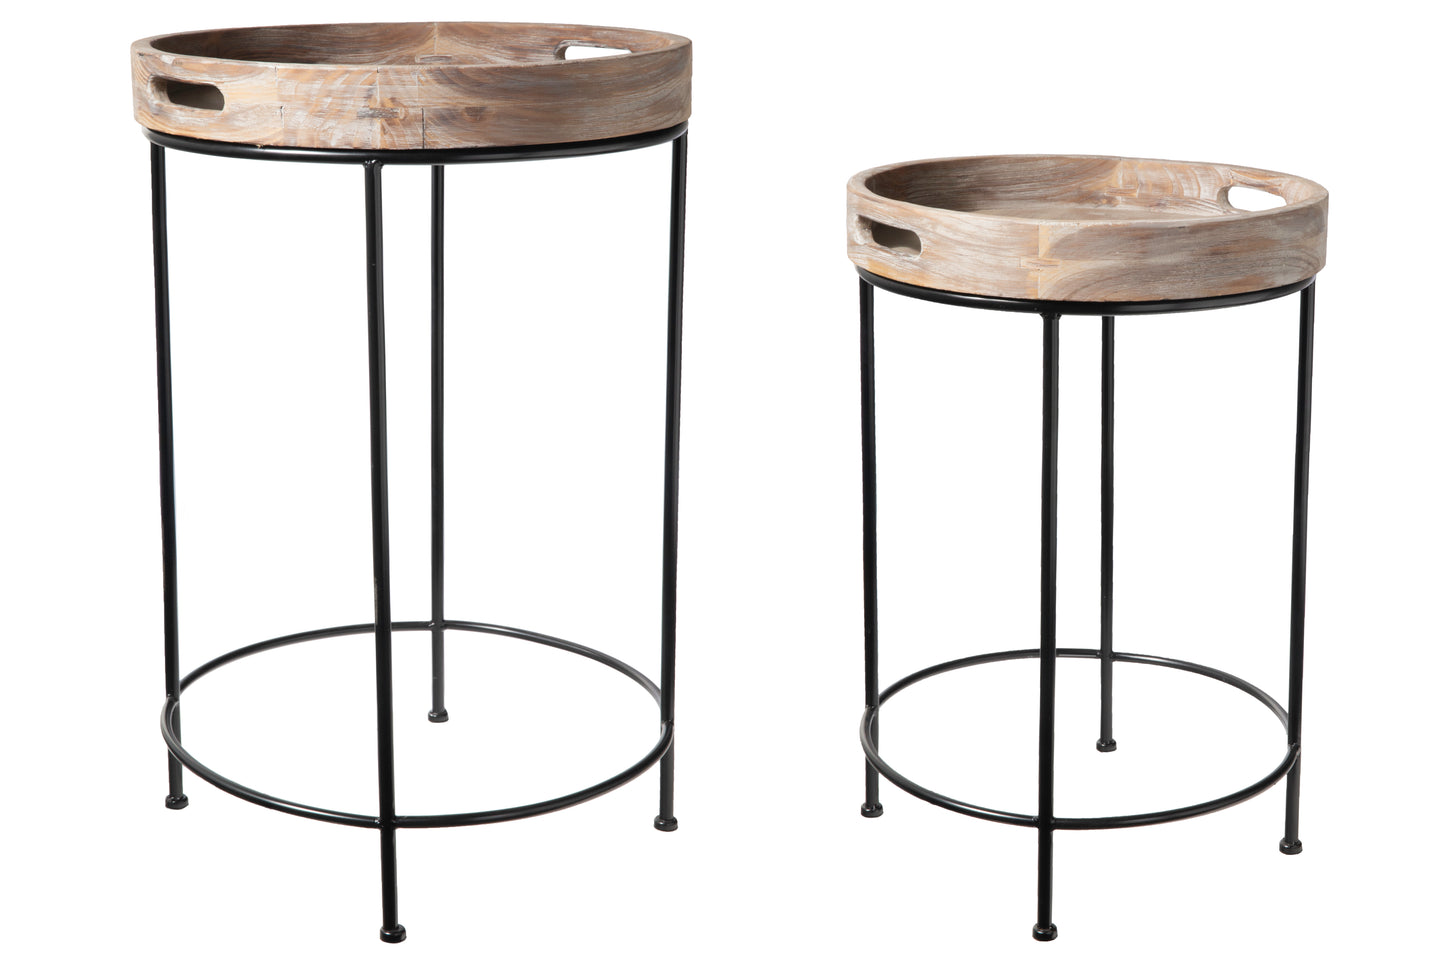 Metal & Wood Round Tray Table with Cutout Side Handles and Black Metal Stand